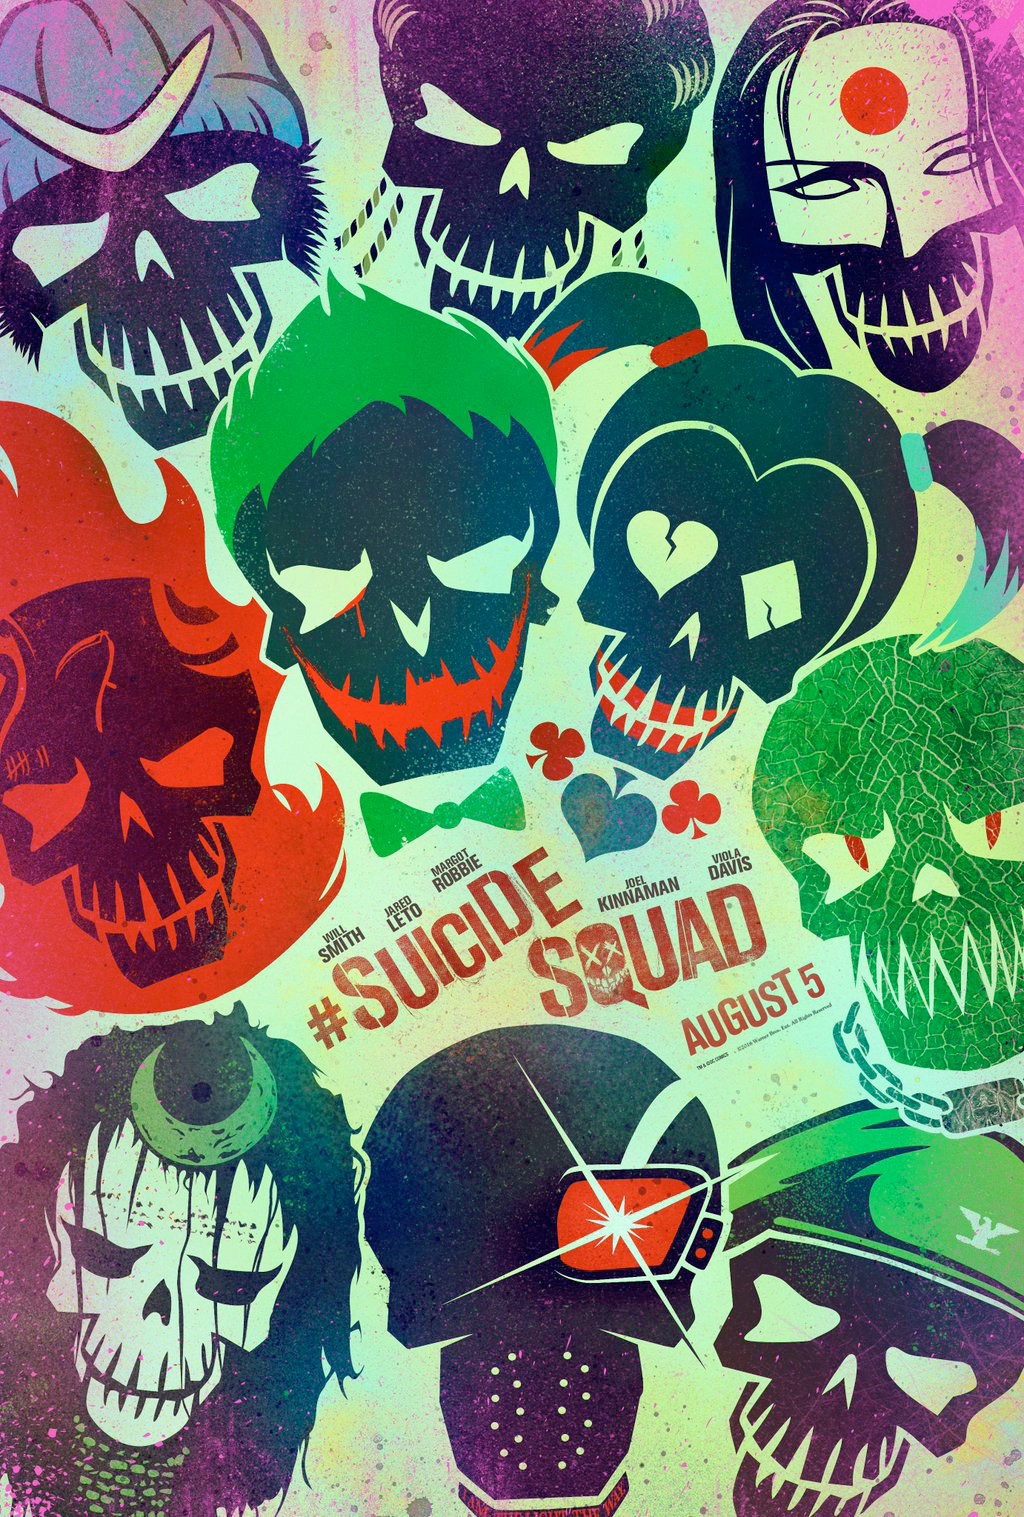 Read more about the article Suicide Squad Character Posters